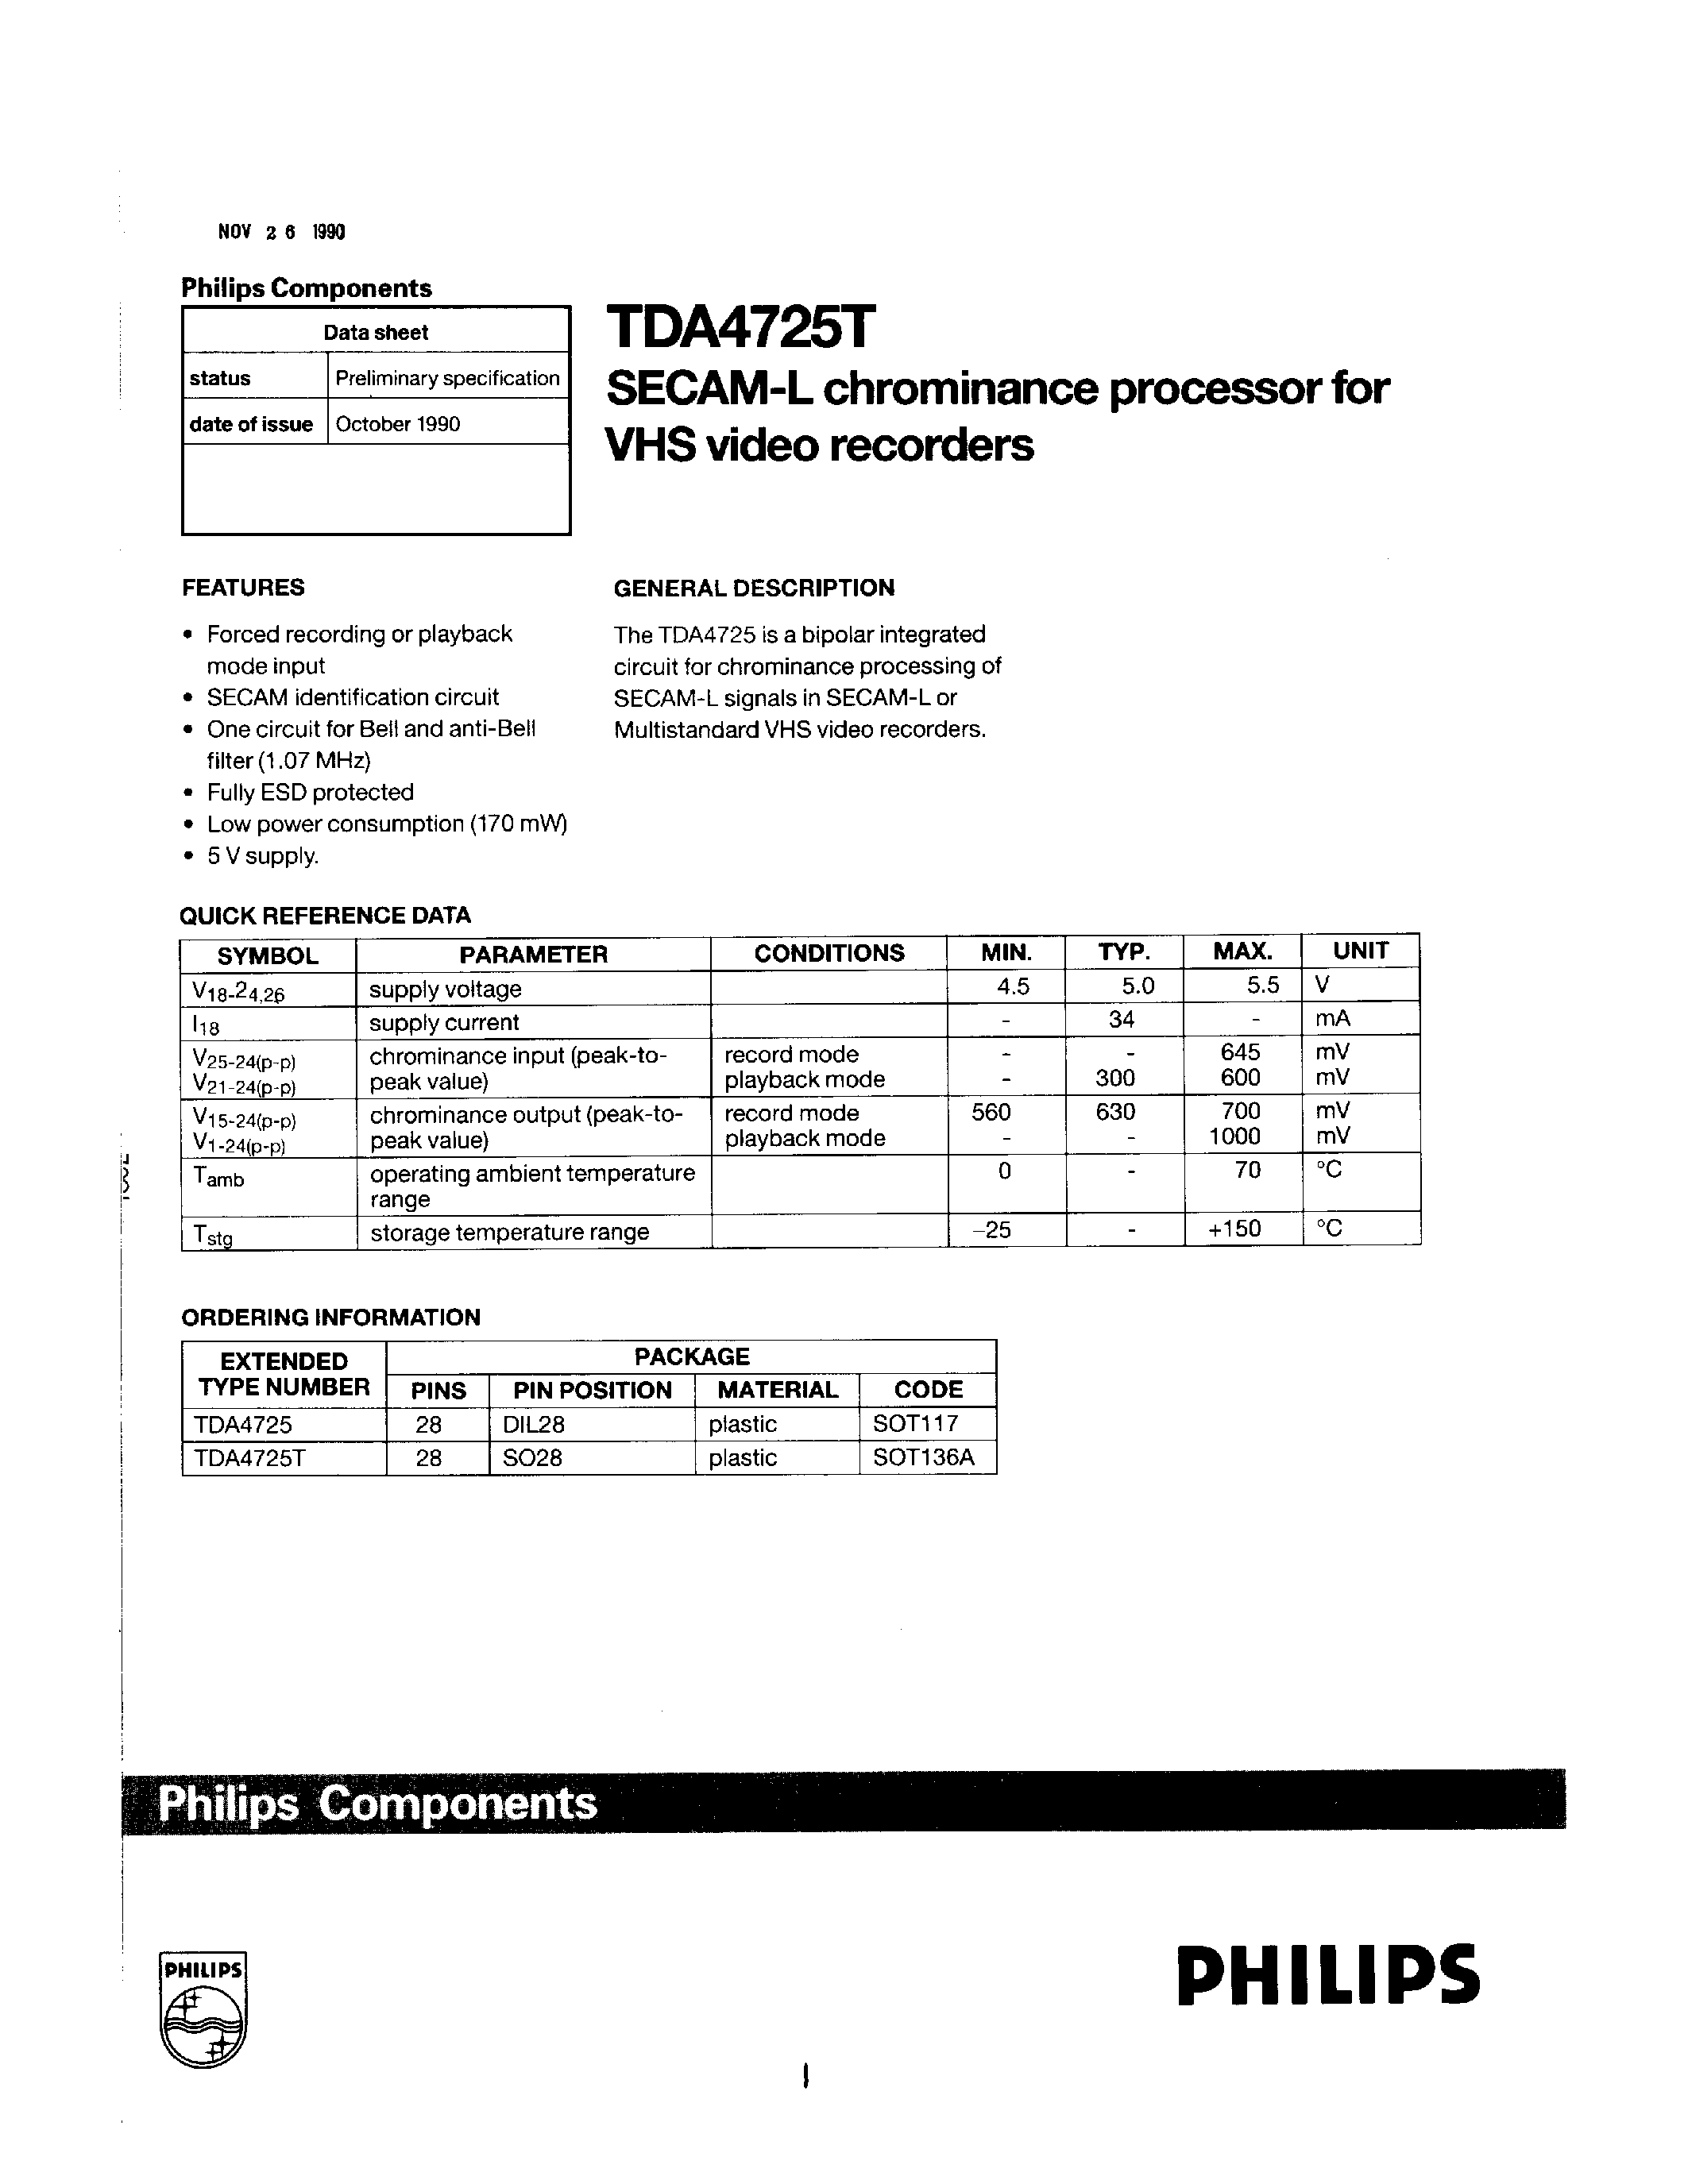 Datasheet TDA4725T - SECAM-L CHROMINANCE PROCESSOR FOR VHS VIDEO RECORDERS page 1